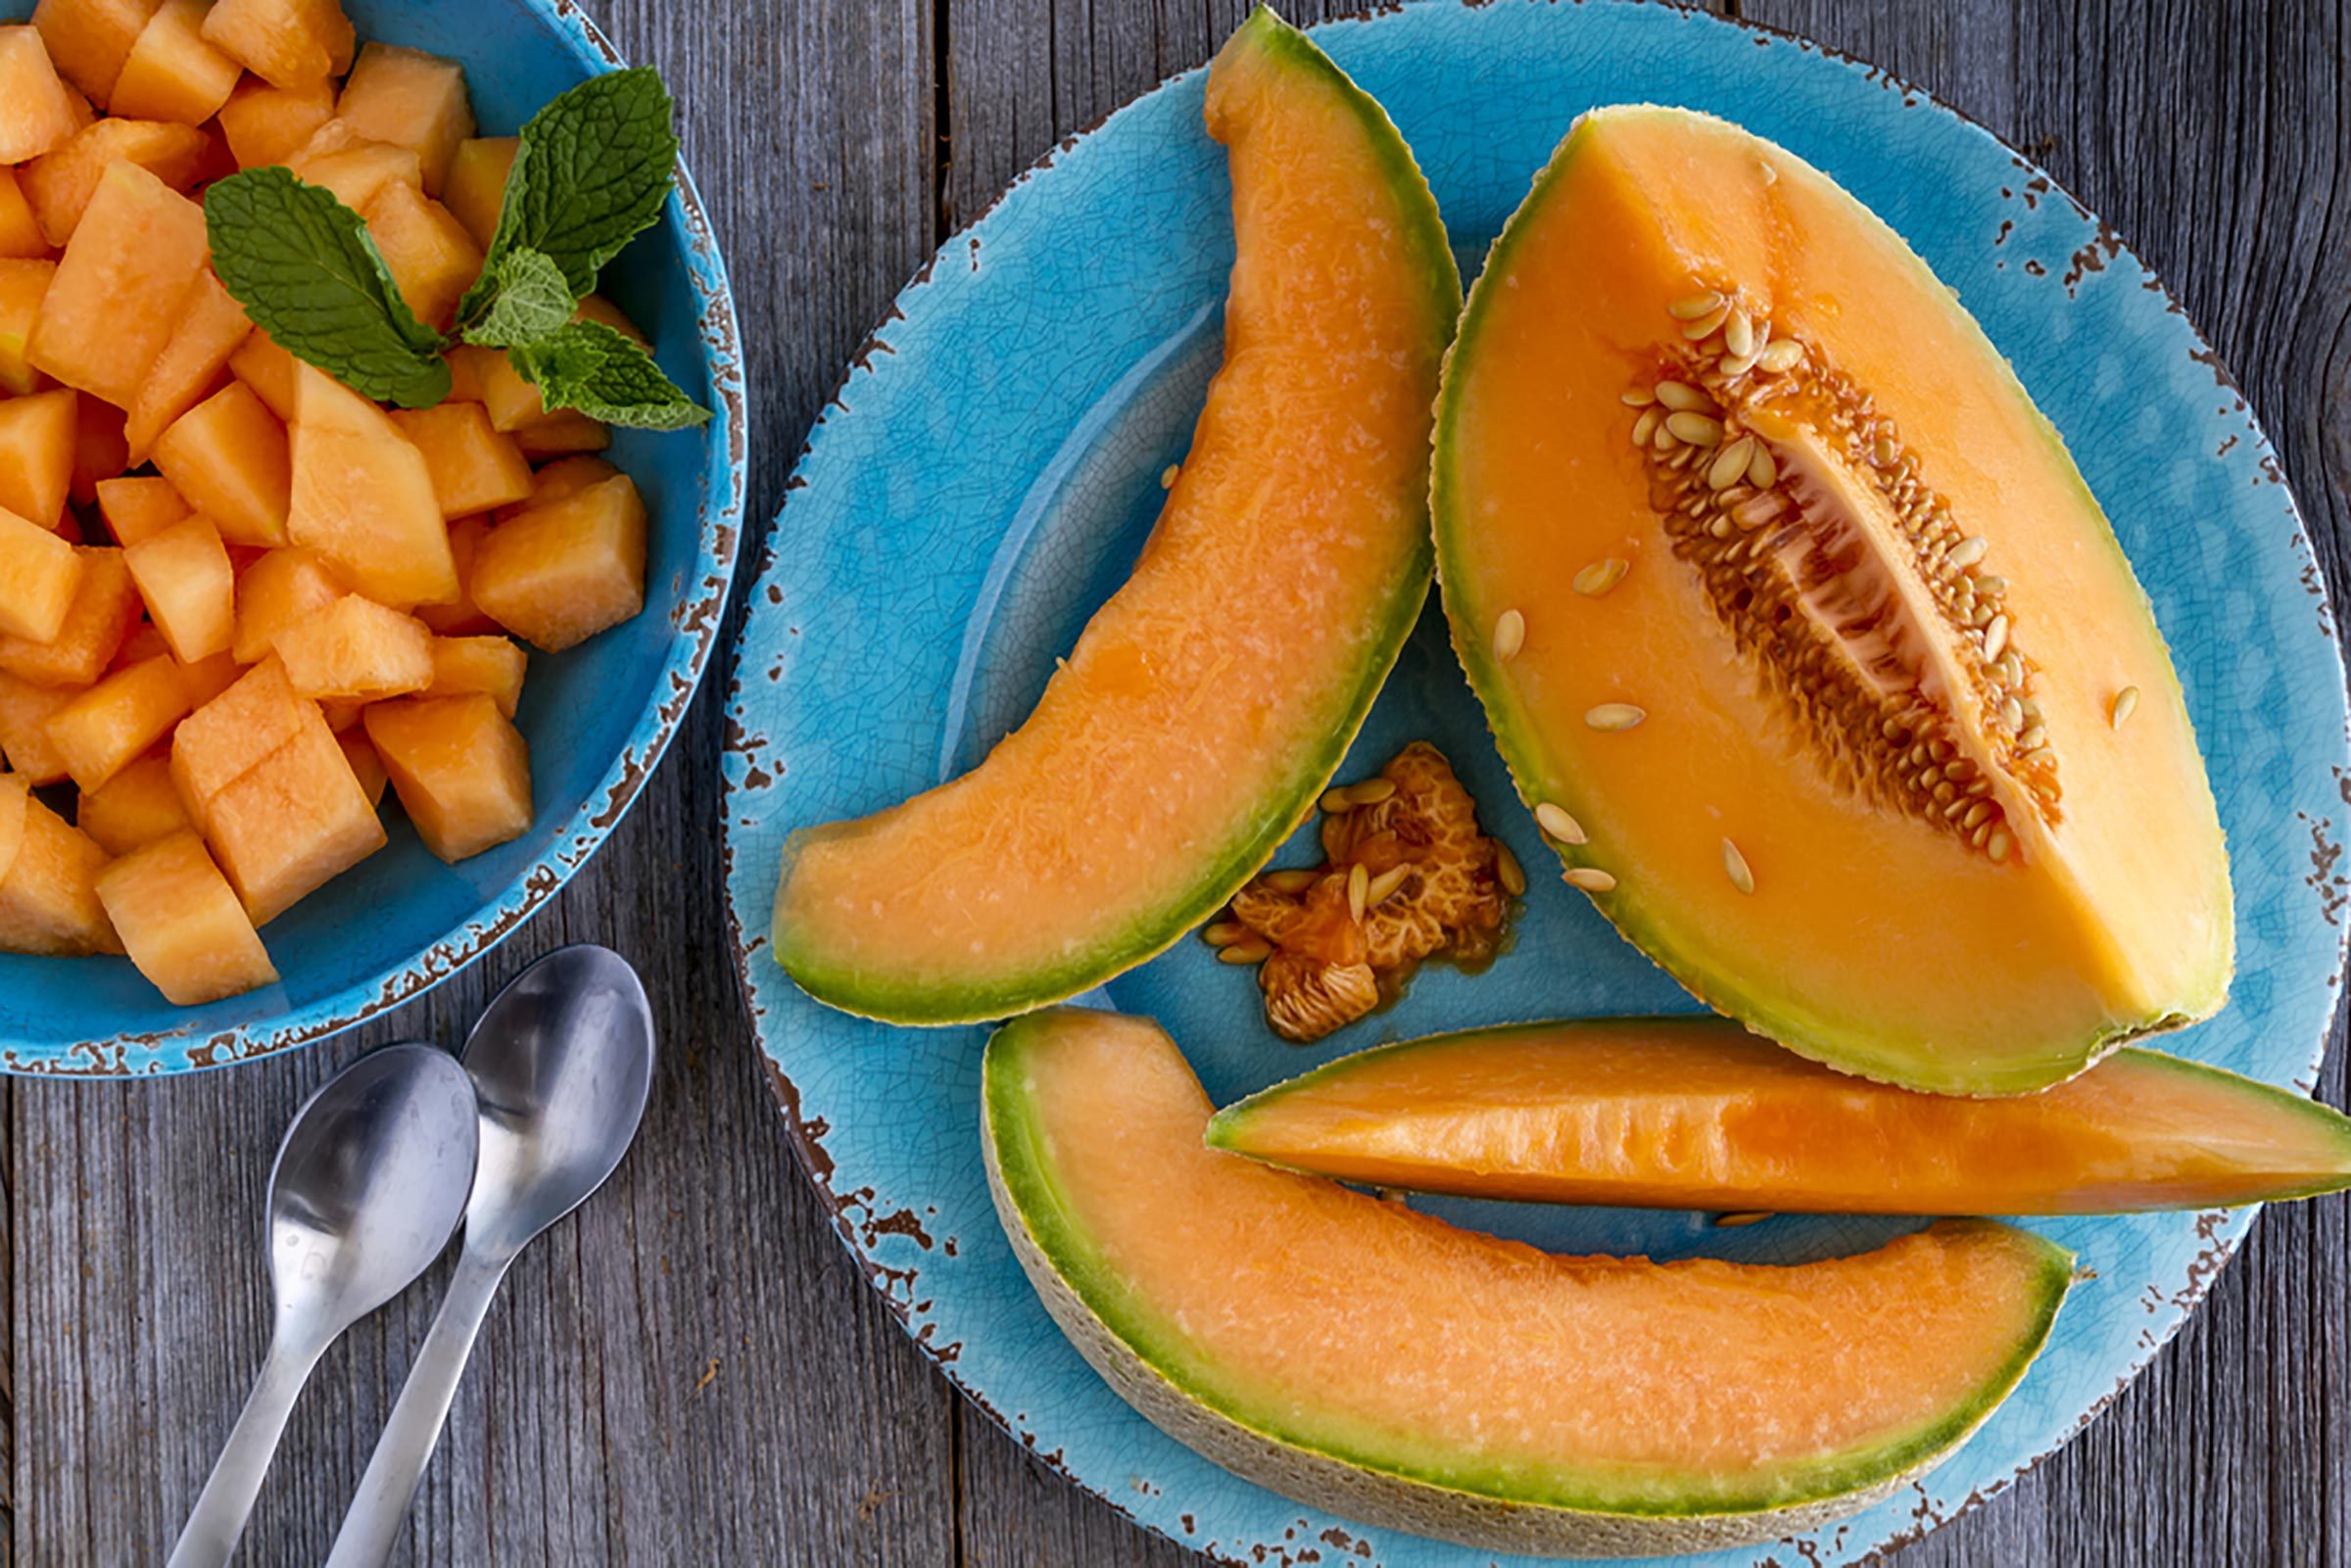 7 Health Benefits of Cantaloupe You Didn't Know About (and a Word of Caution)